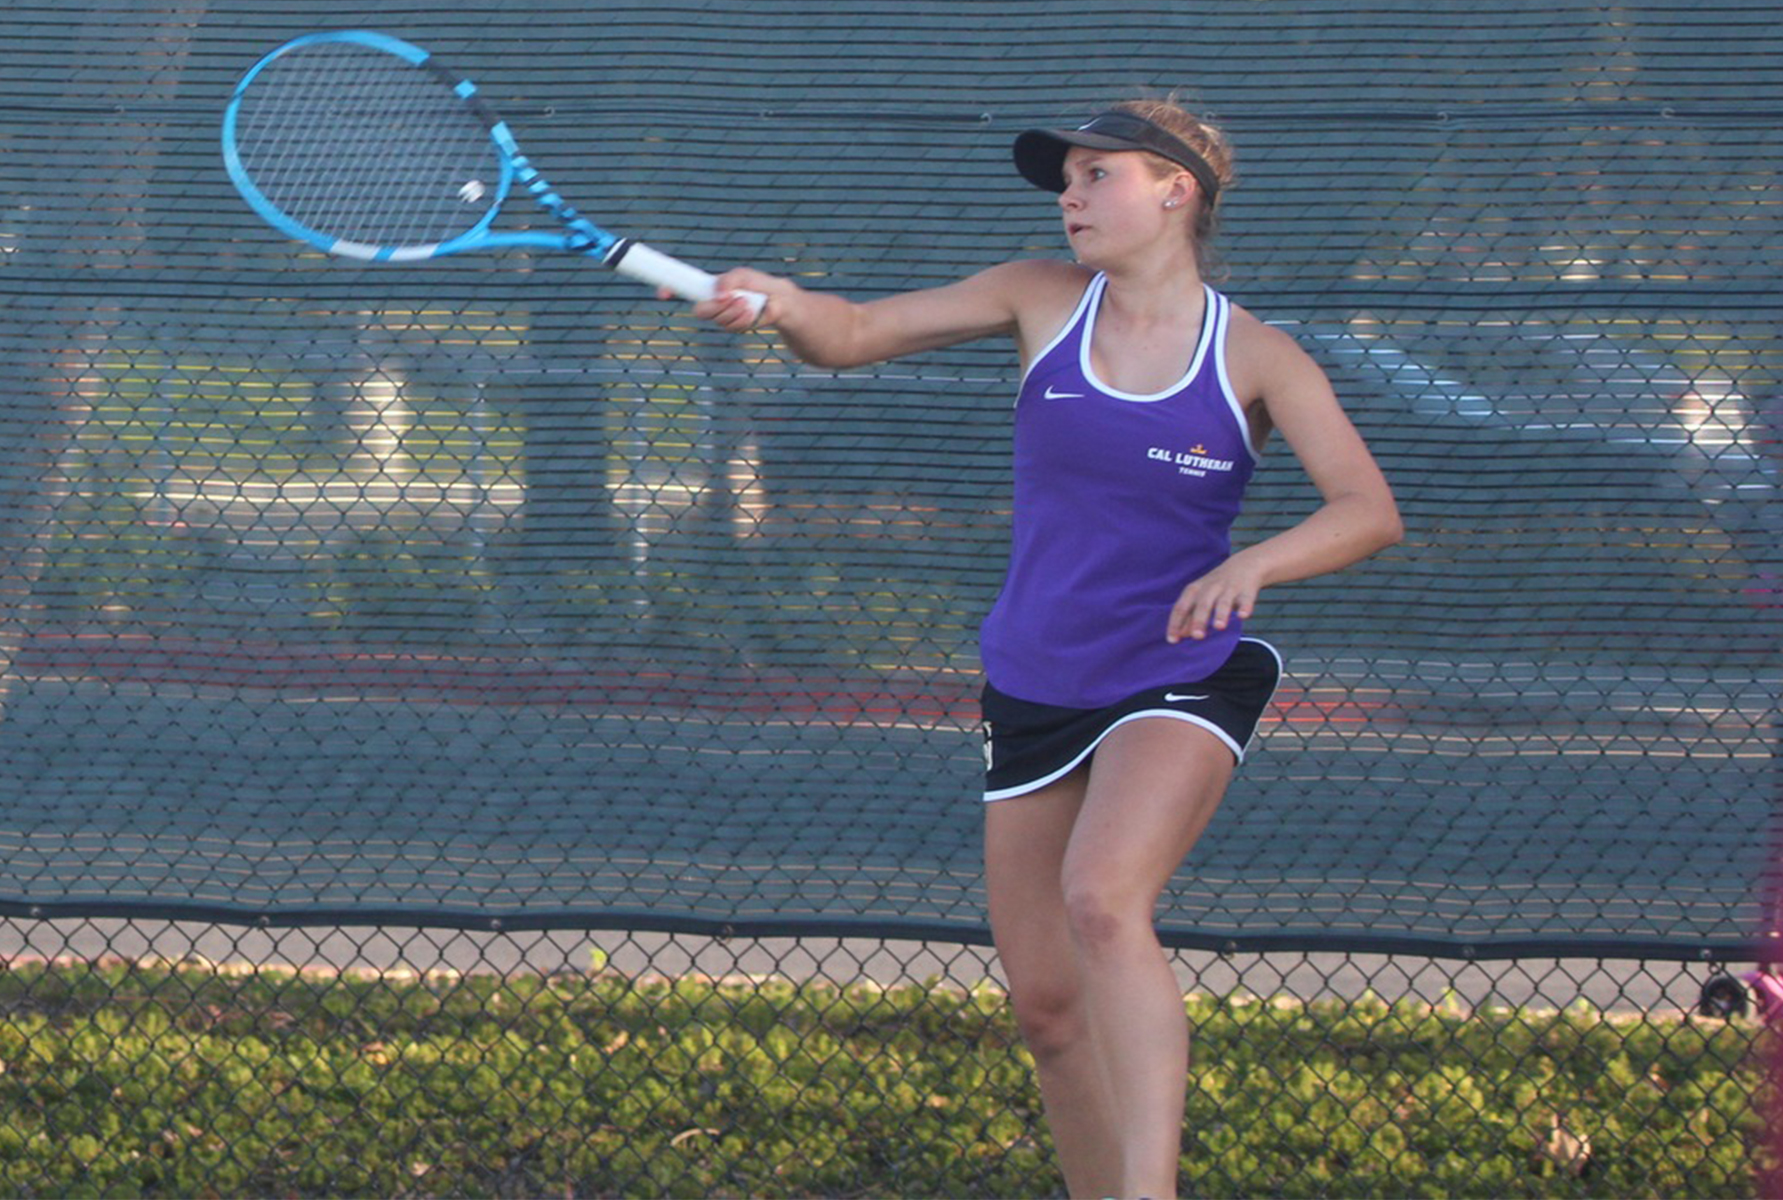 Heidi Levanen enjoyed a very successful day in the Regals' season opener.